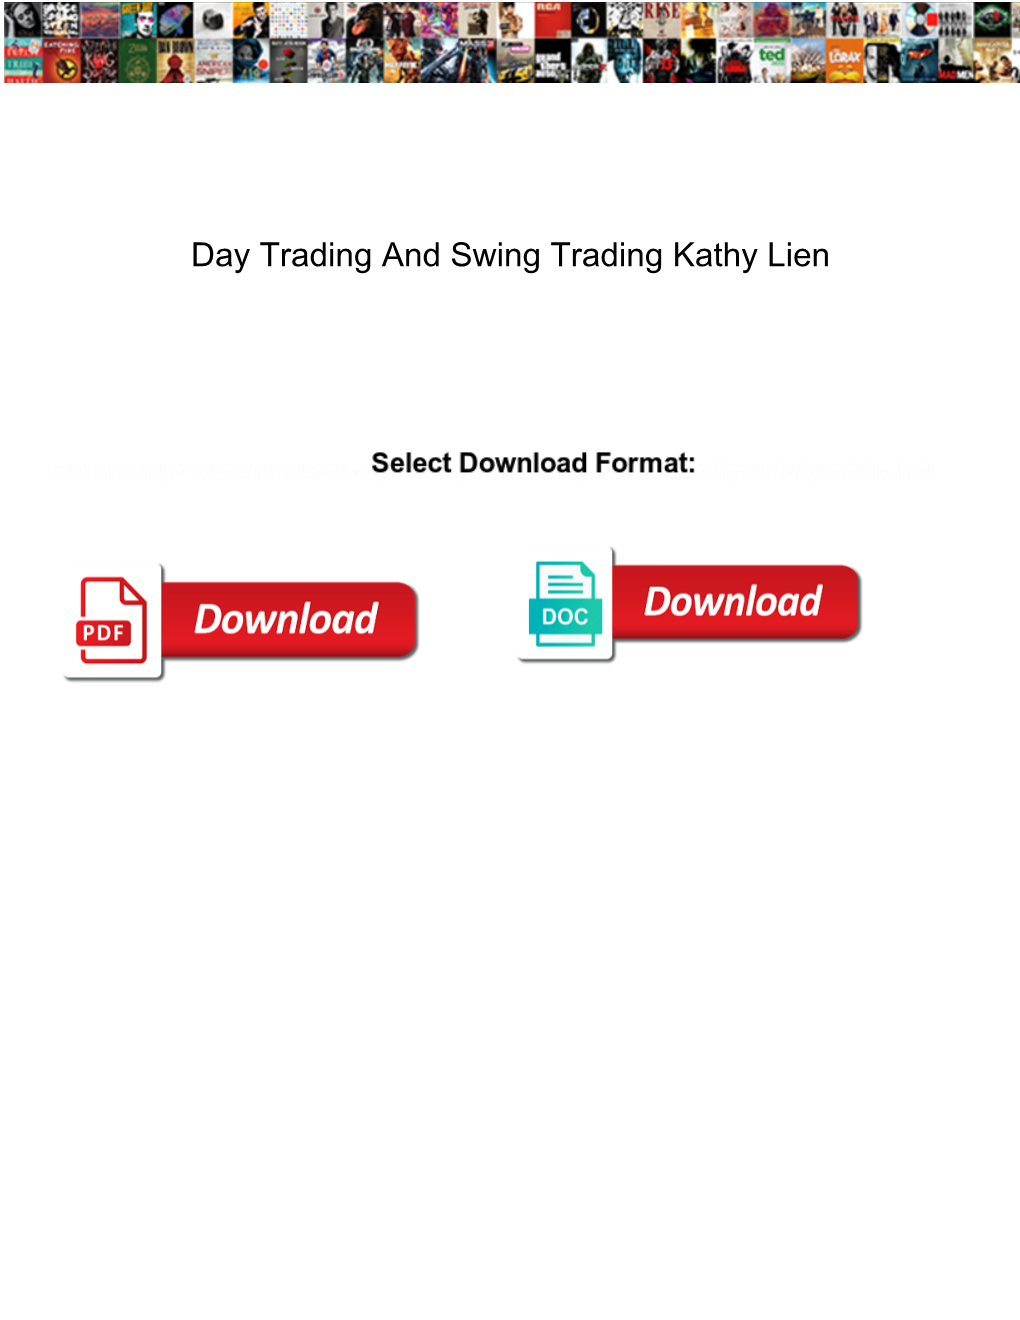 Day Trading and Swing Trading Kathy Lien